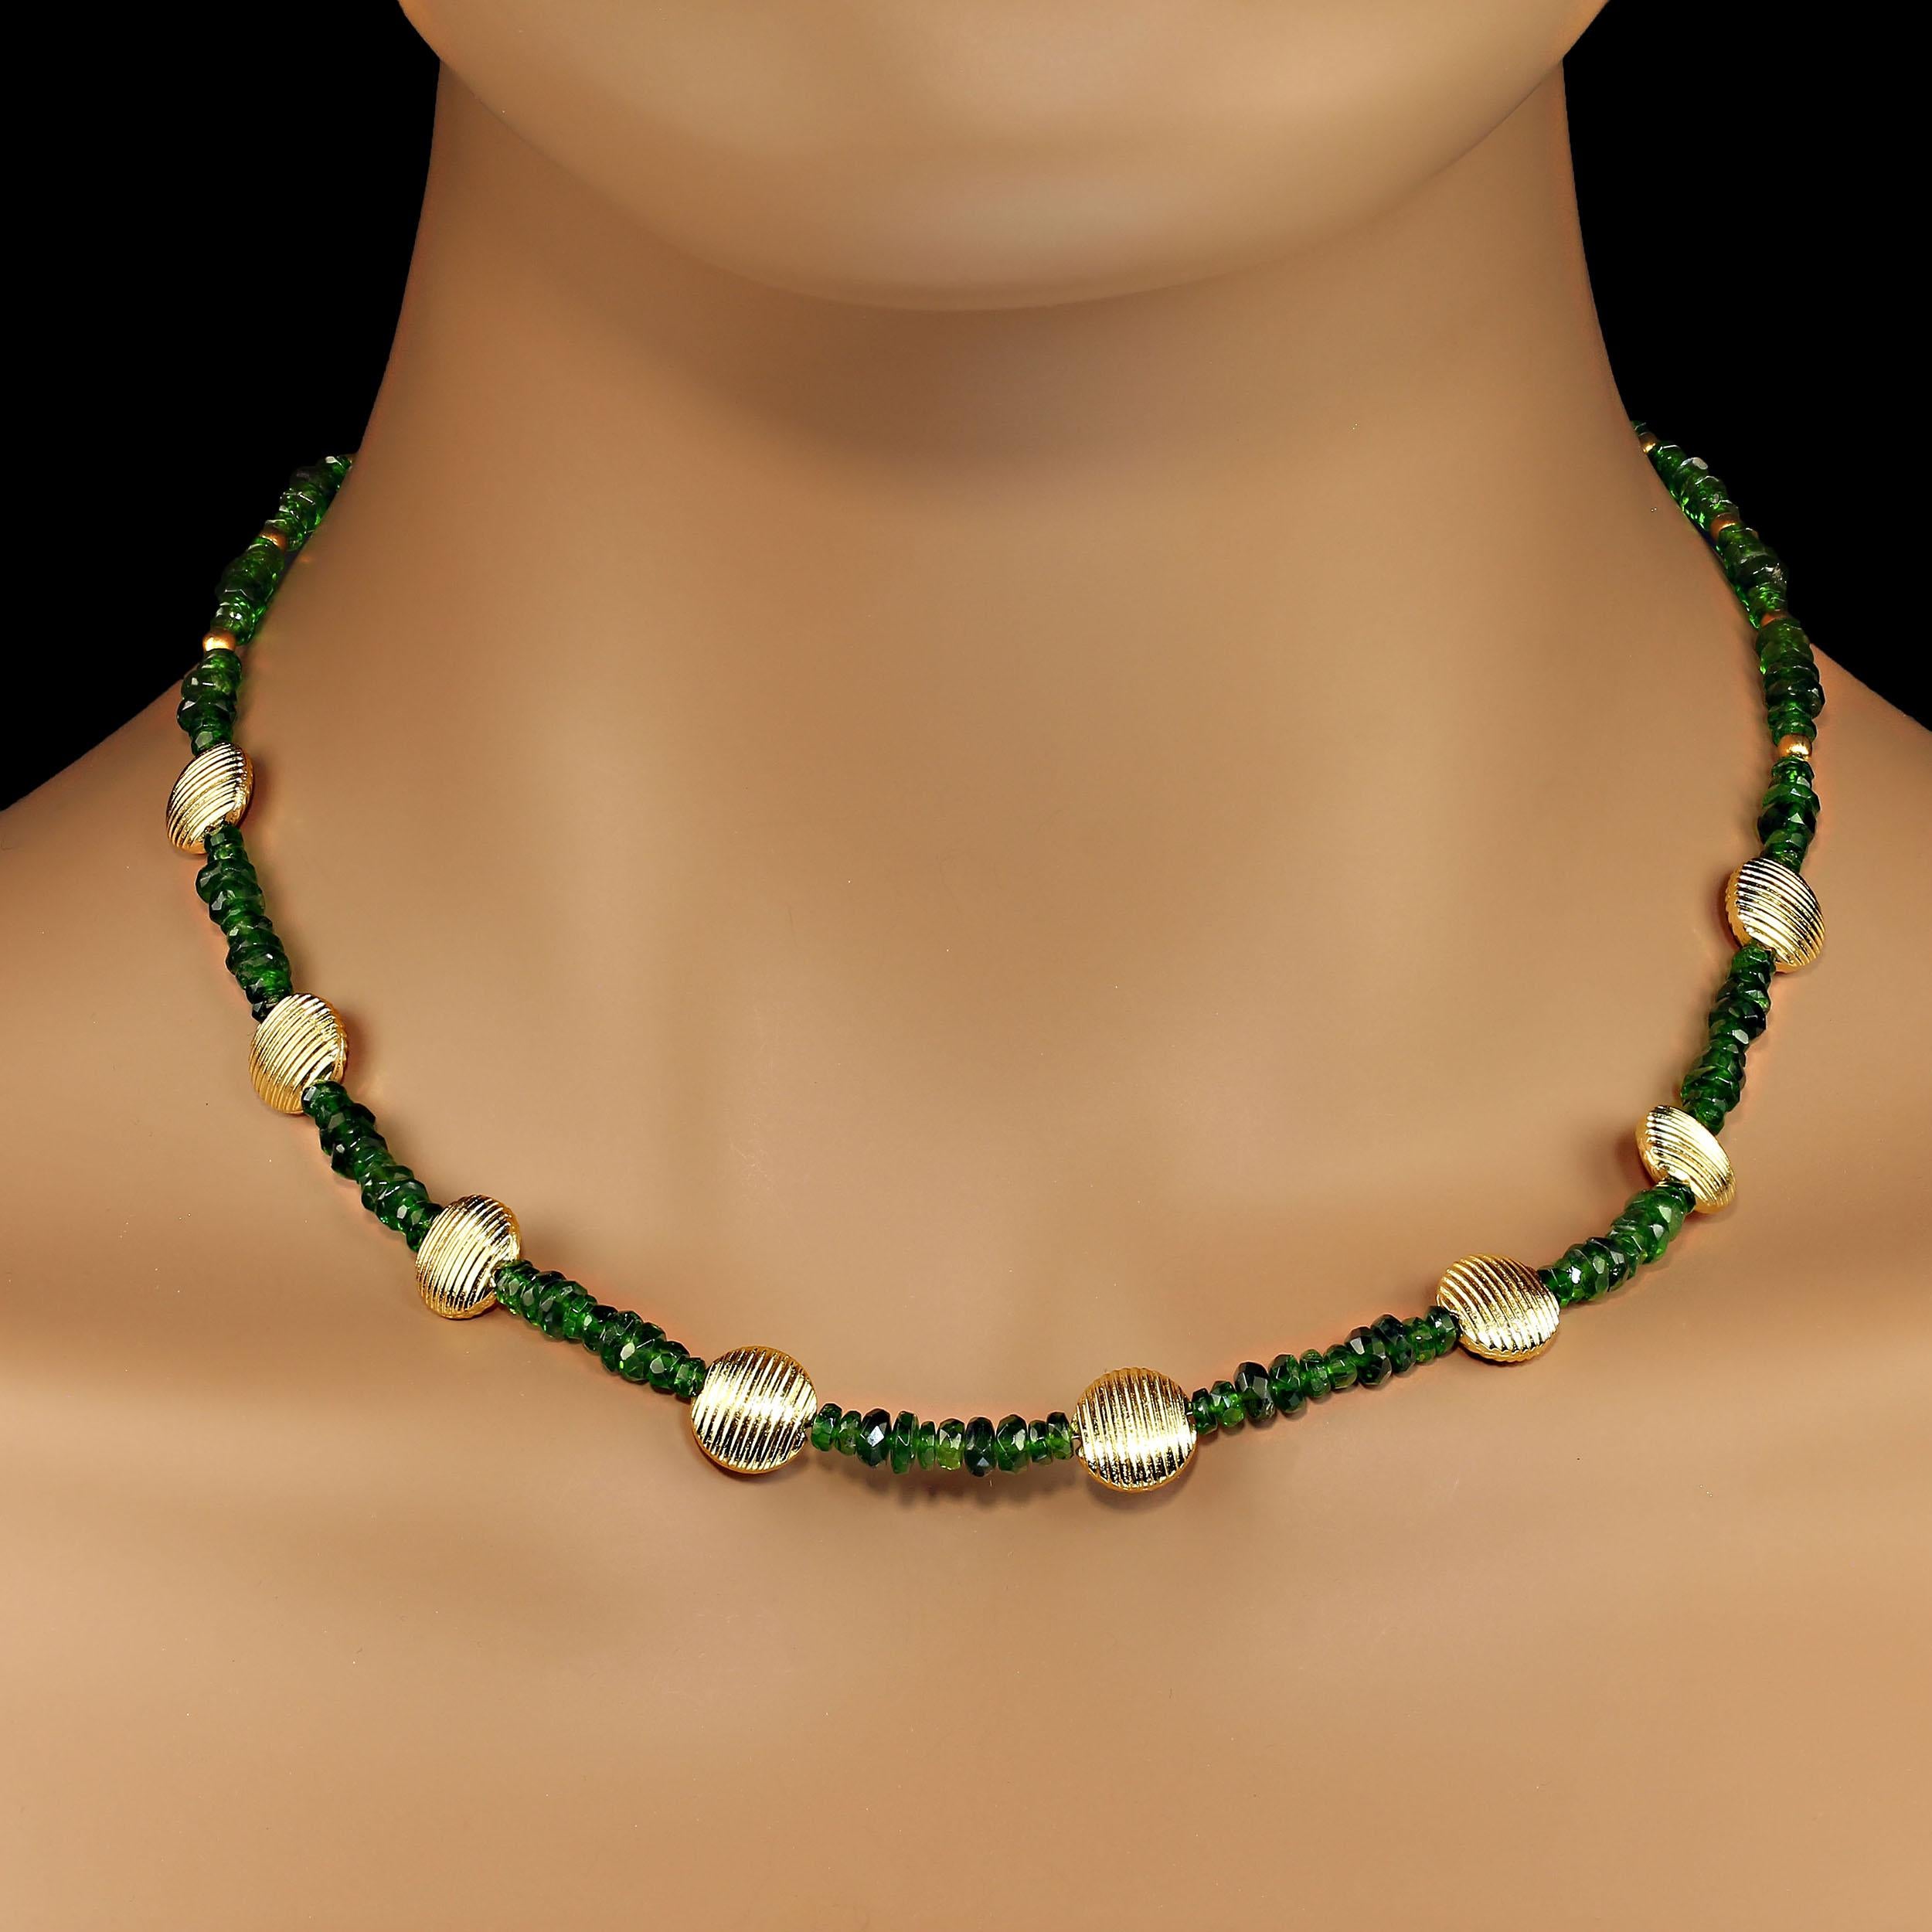 Artisan AJD Delicate Green Chrome Diopside and Goldy Accents Necklace  Great Gift! For Sale